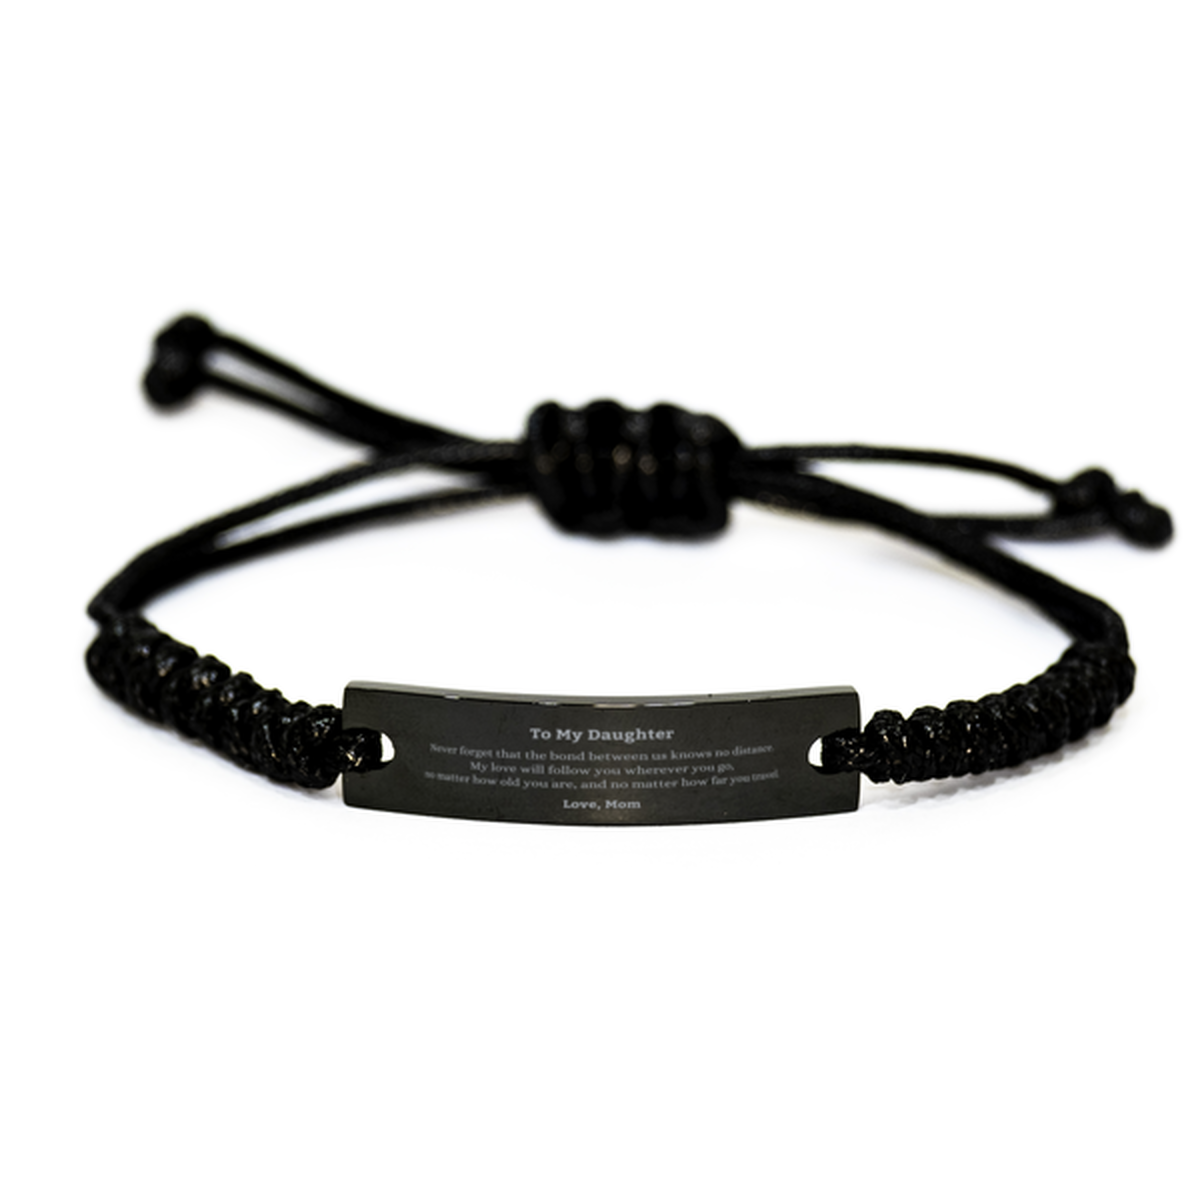 Daughter Birthday Gifts from Mom, Adjustable Black Rope Bracelet for Daughter Christmas Graduation Unique Gifts Daughter Never forget that the bond between us knows no distance. Love, Mom